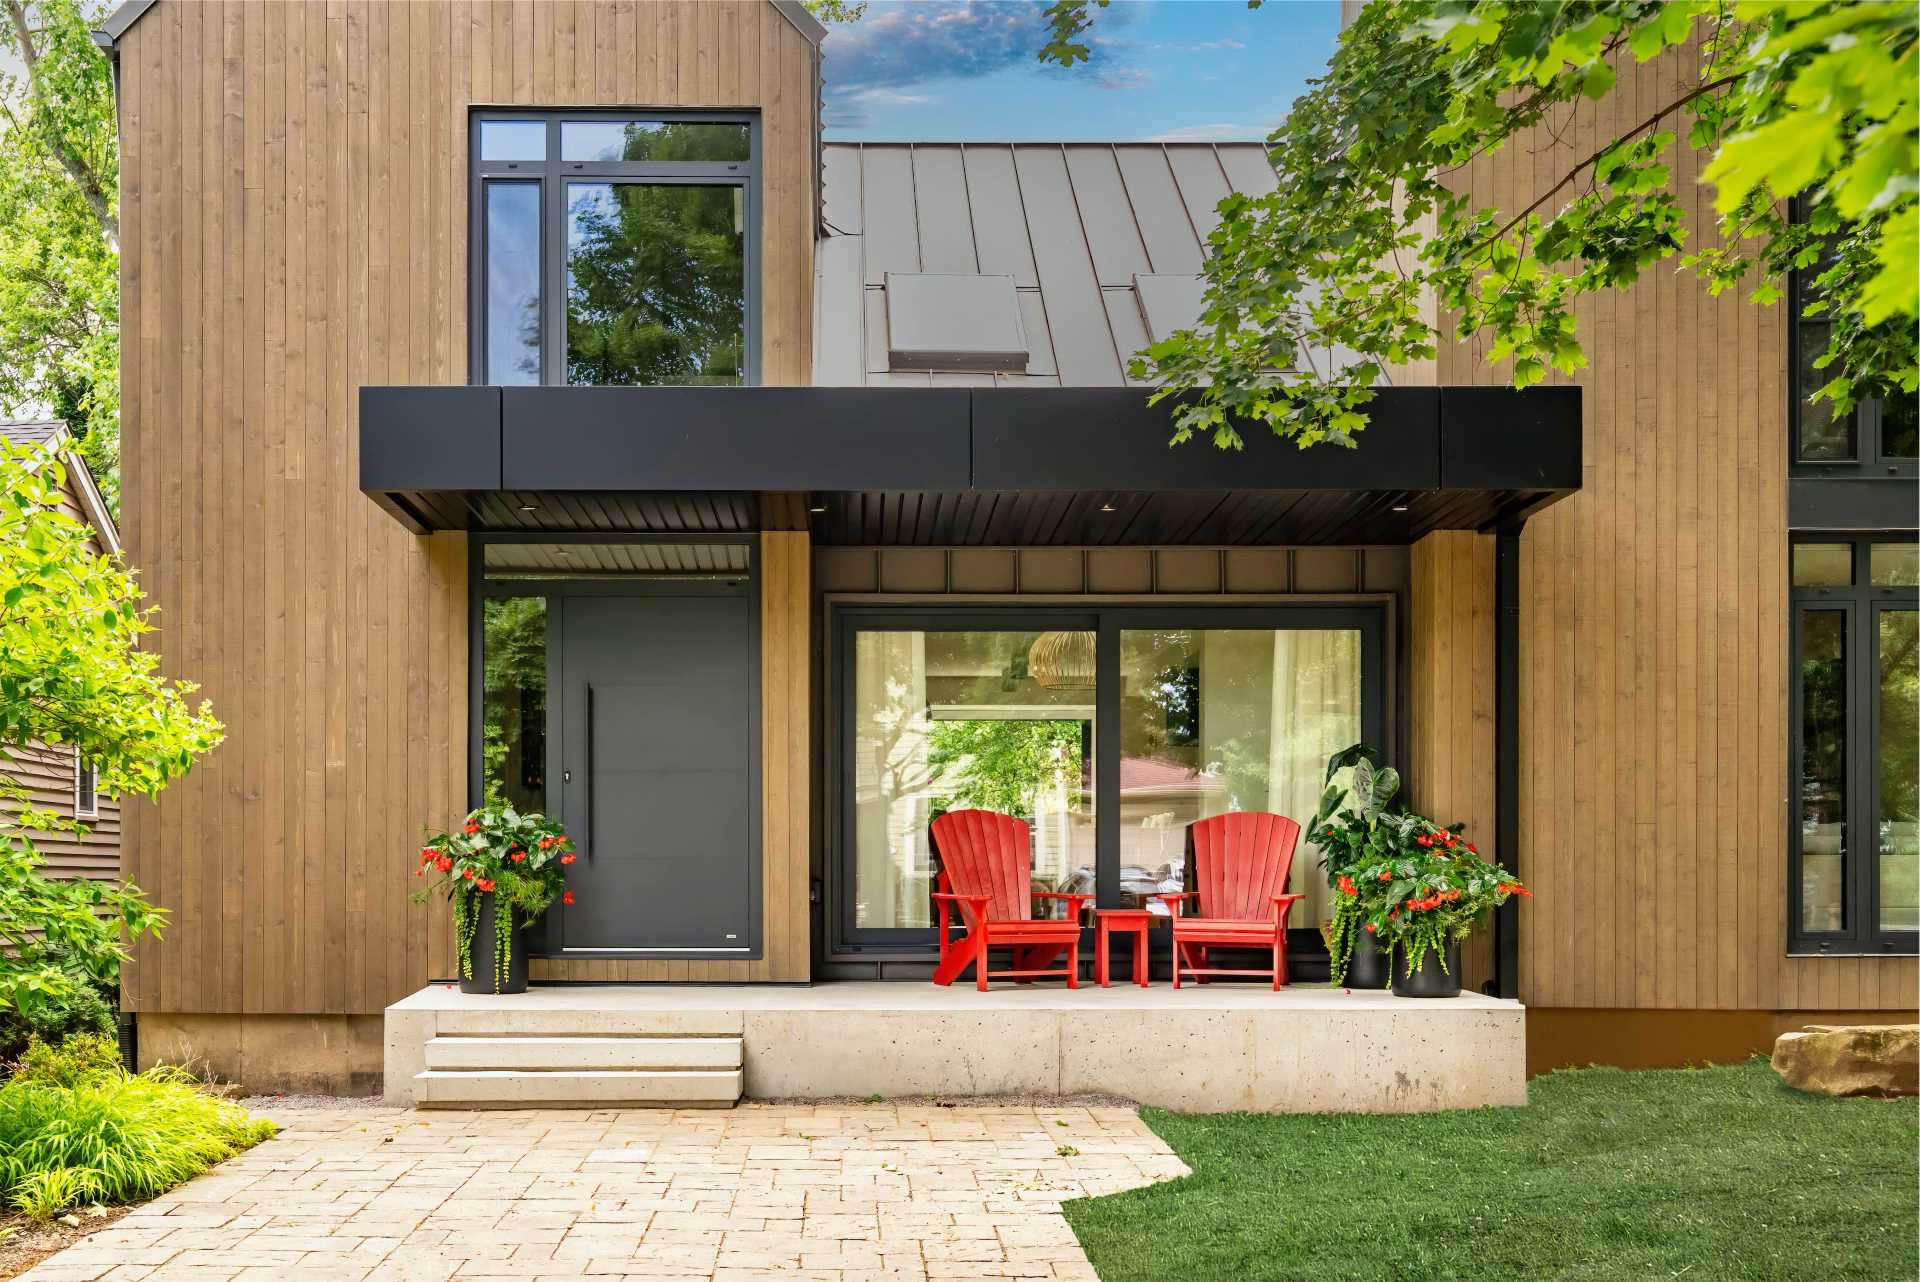 This 1980s home was transformed to include Scandinavian influence externally, and playful sophistication within, while neutral wood tones found in the vertical exterior siding, creates an intimate connection with its scenic lakeside locale.